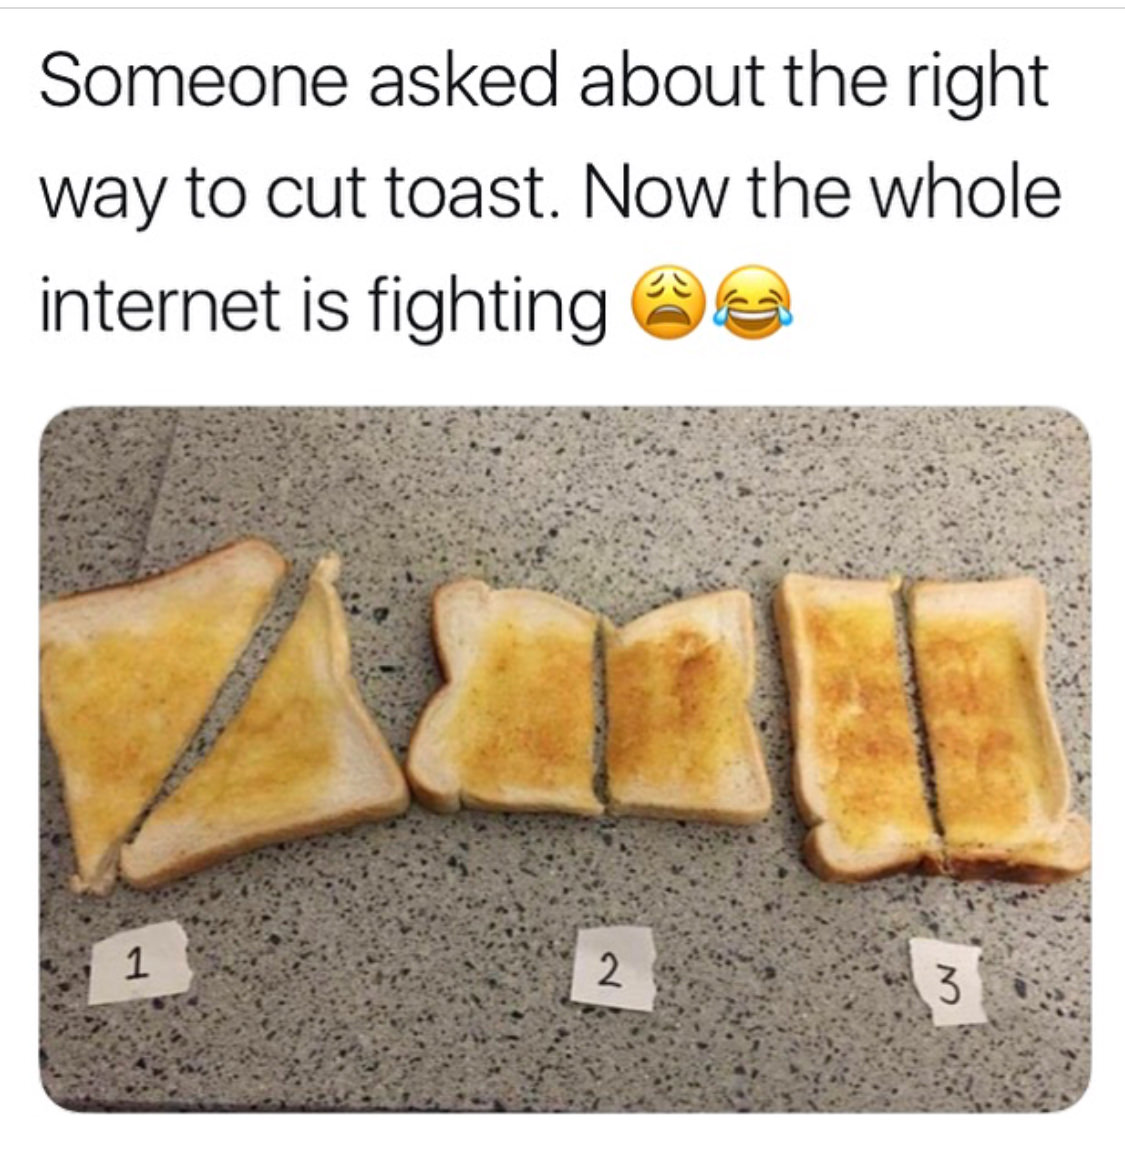 right way to cut toast - Someone asked about the right way to cut toast. Now the whole internet is fighting a 3